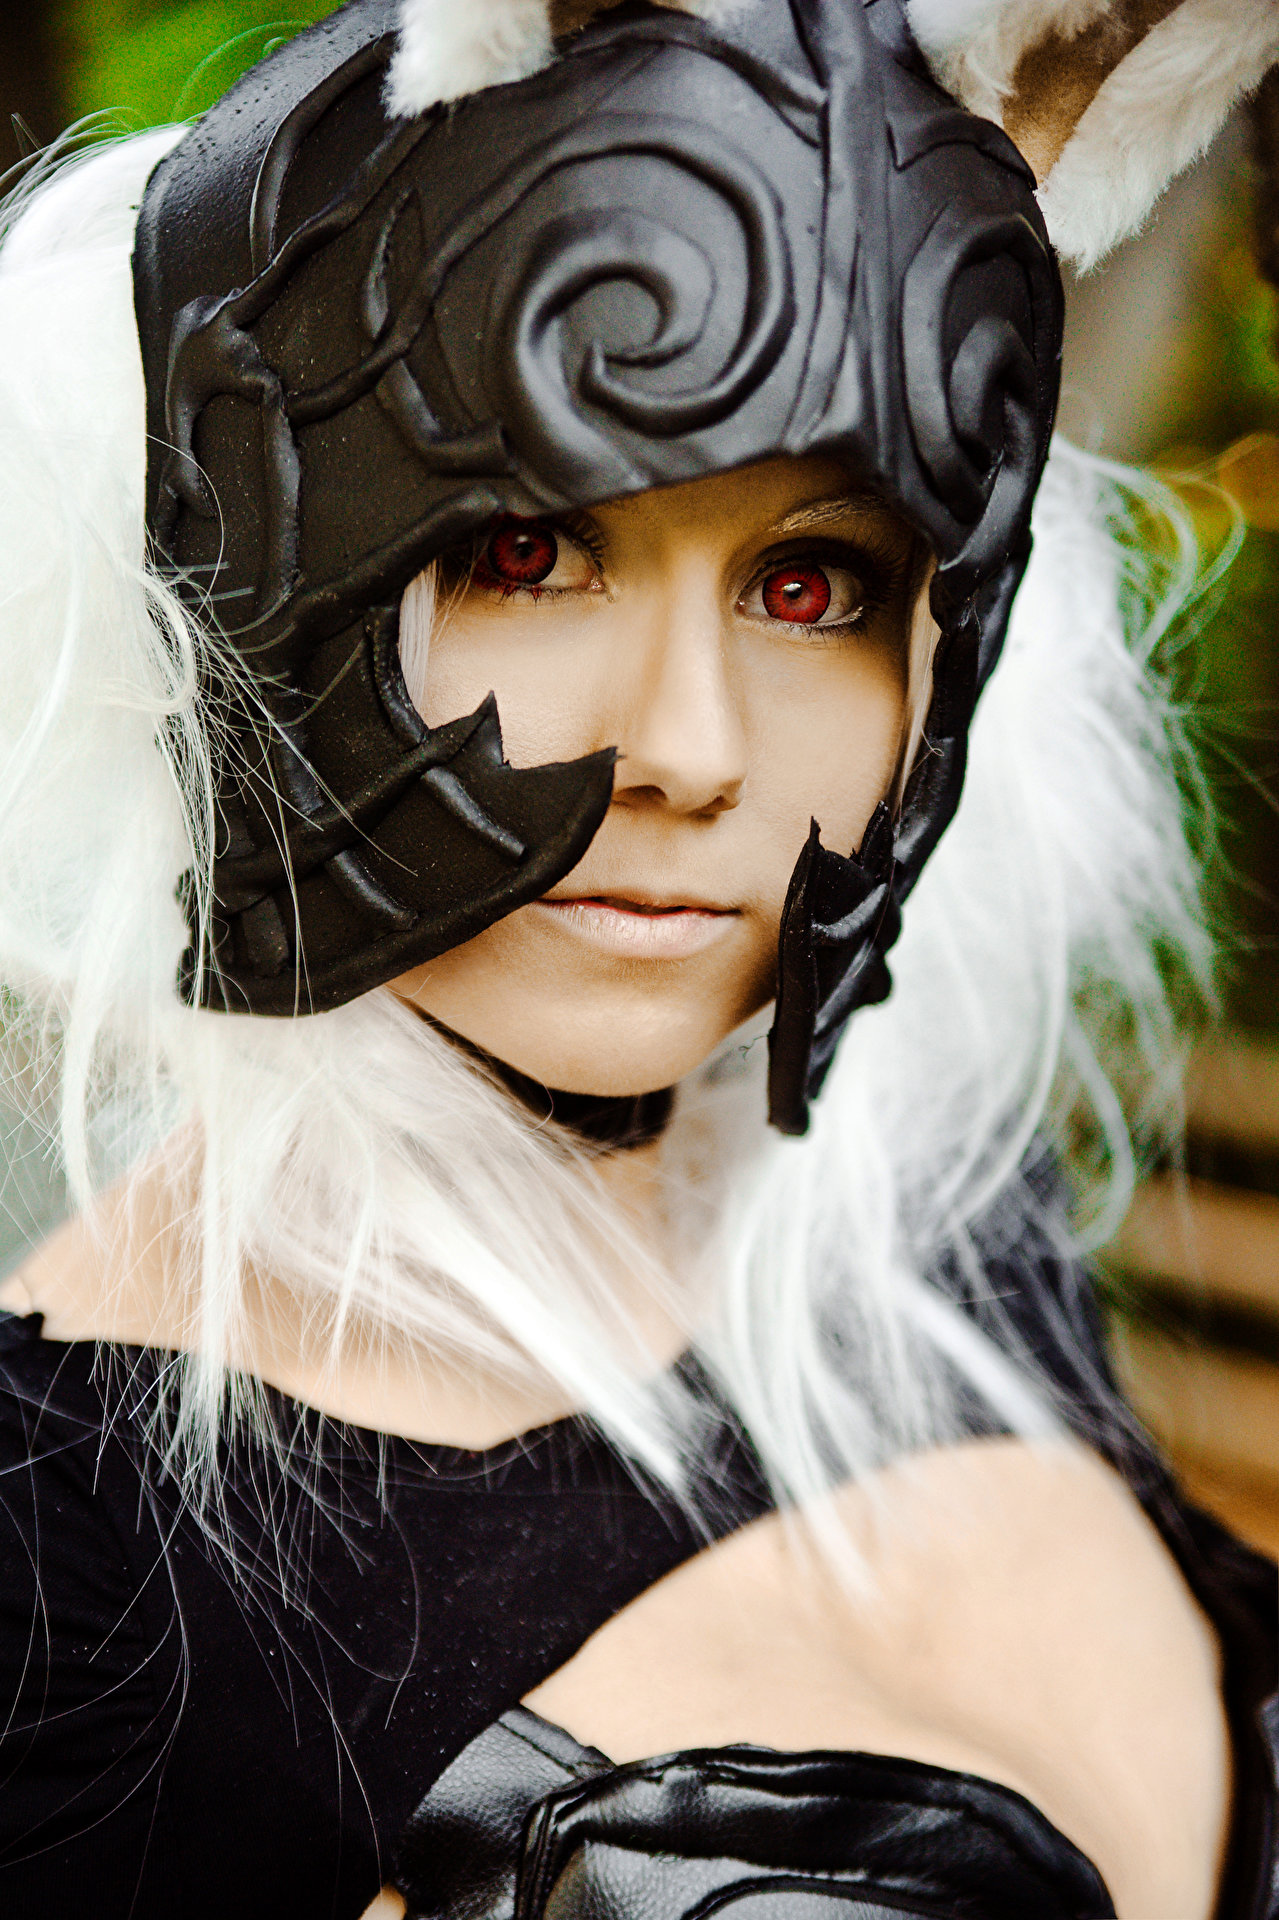 Cospix.net photo featuring Adel Cosplay